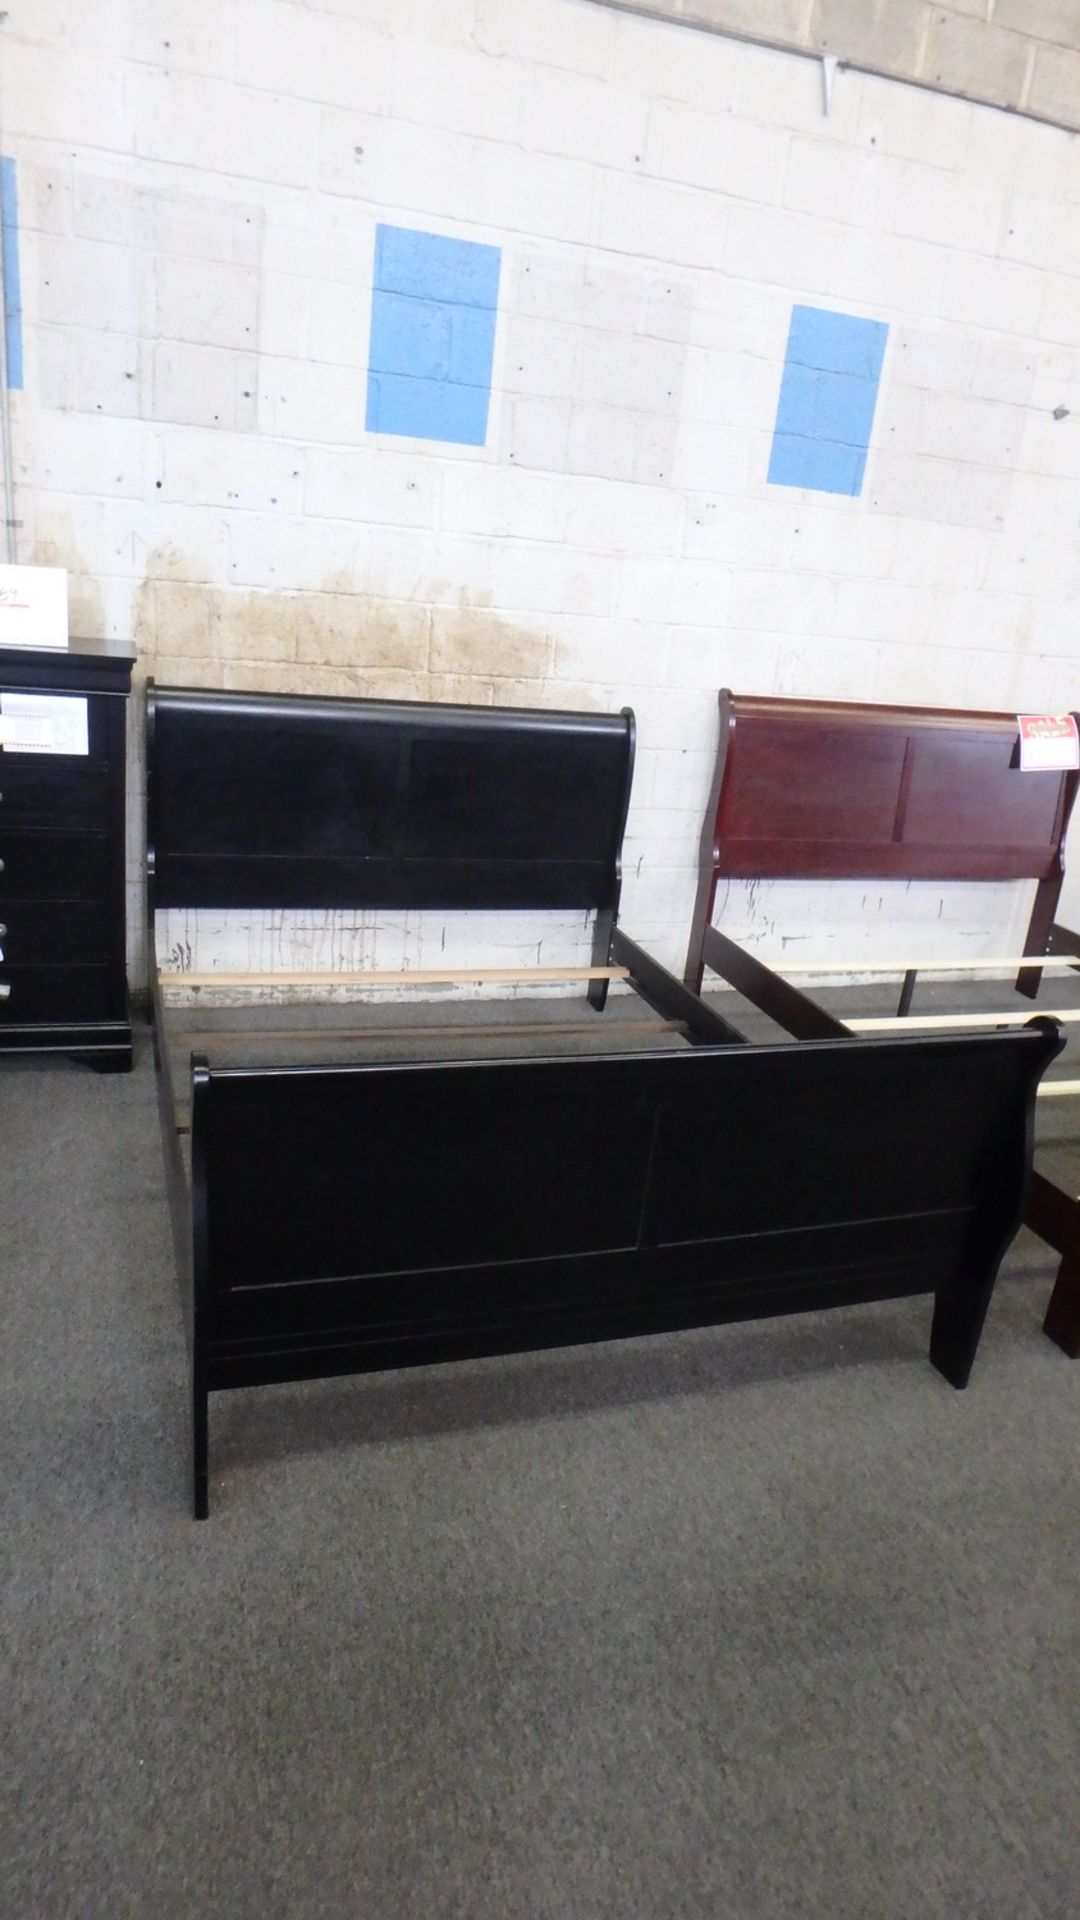 UNITS - (LK-5934) BLACK QUEEN BED FRAME (NEW IN BOX)